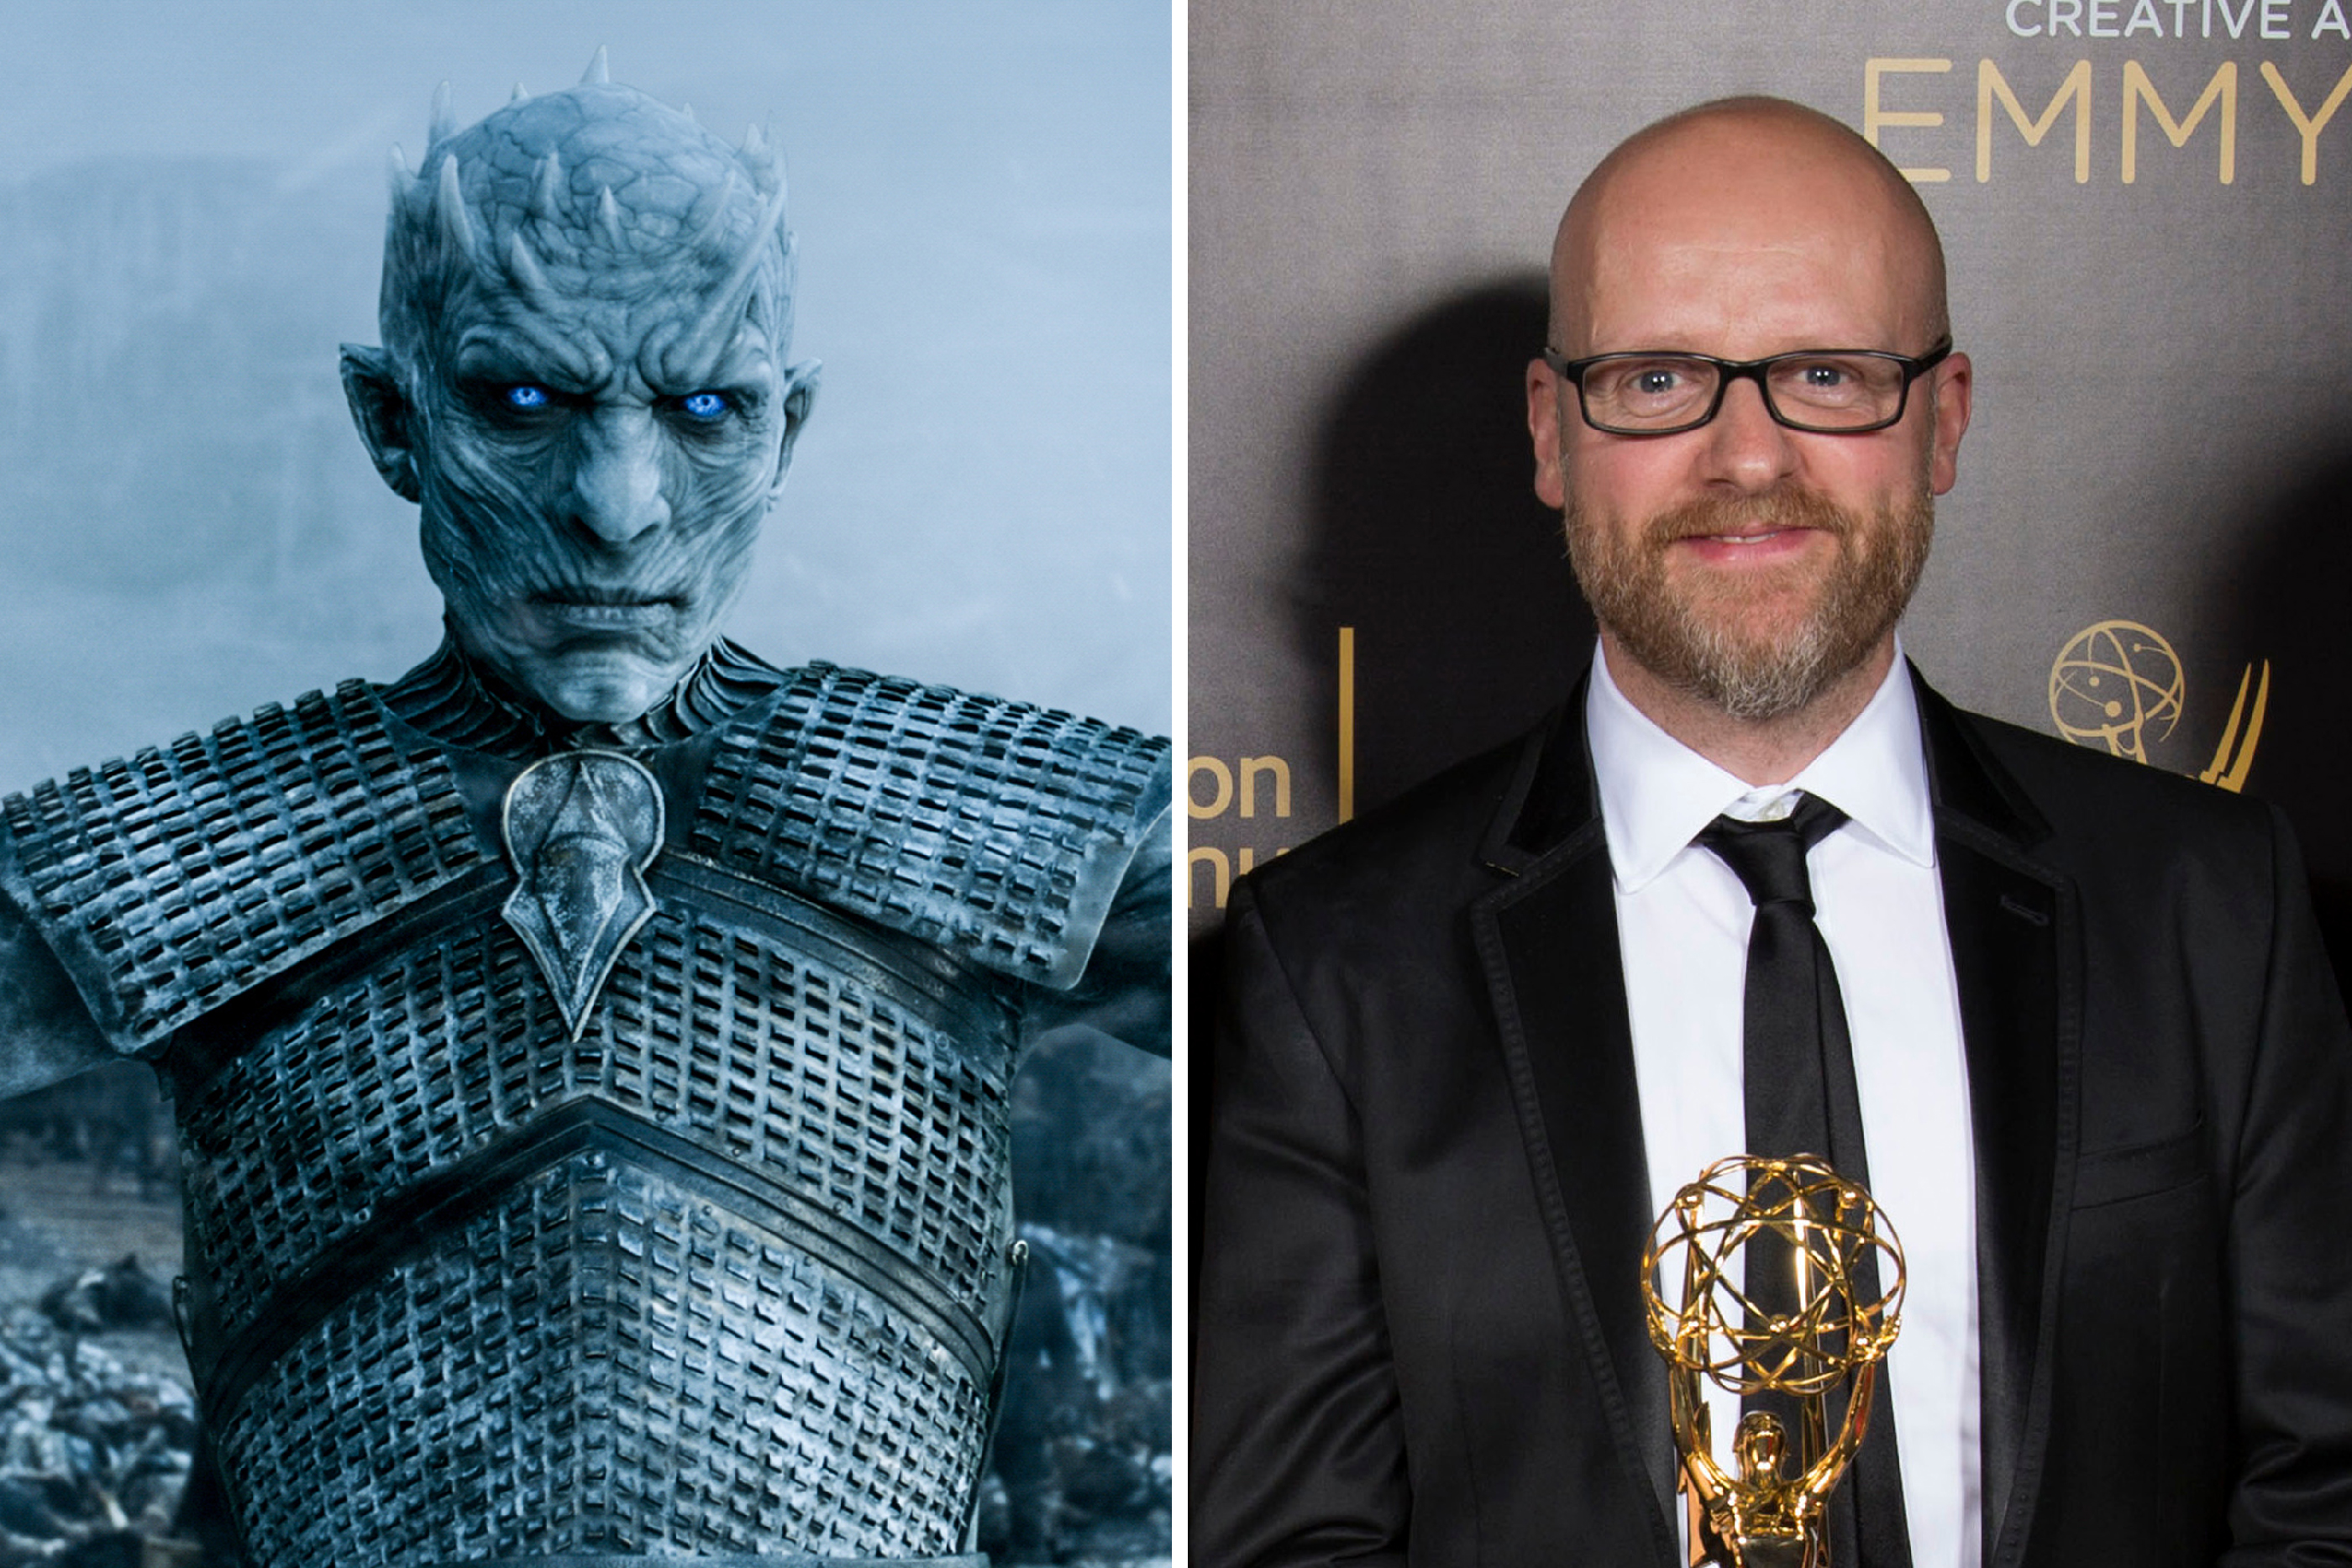 Meet the ‘Game of Thrones’ Prosthetics Wizard Who Makes the Night King Come Alive